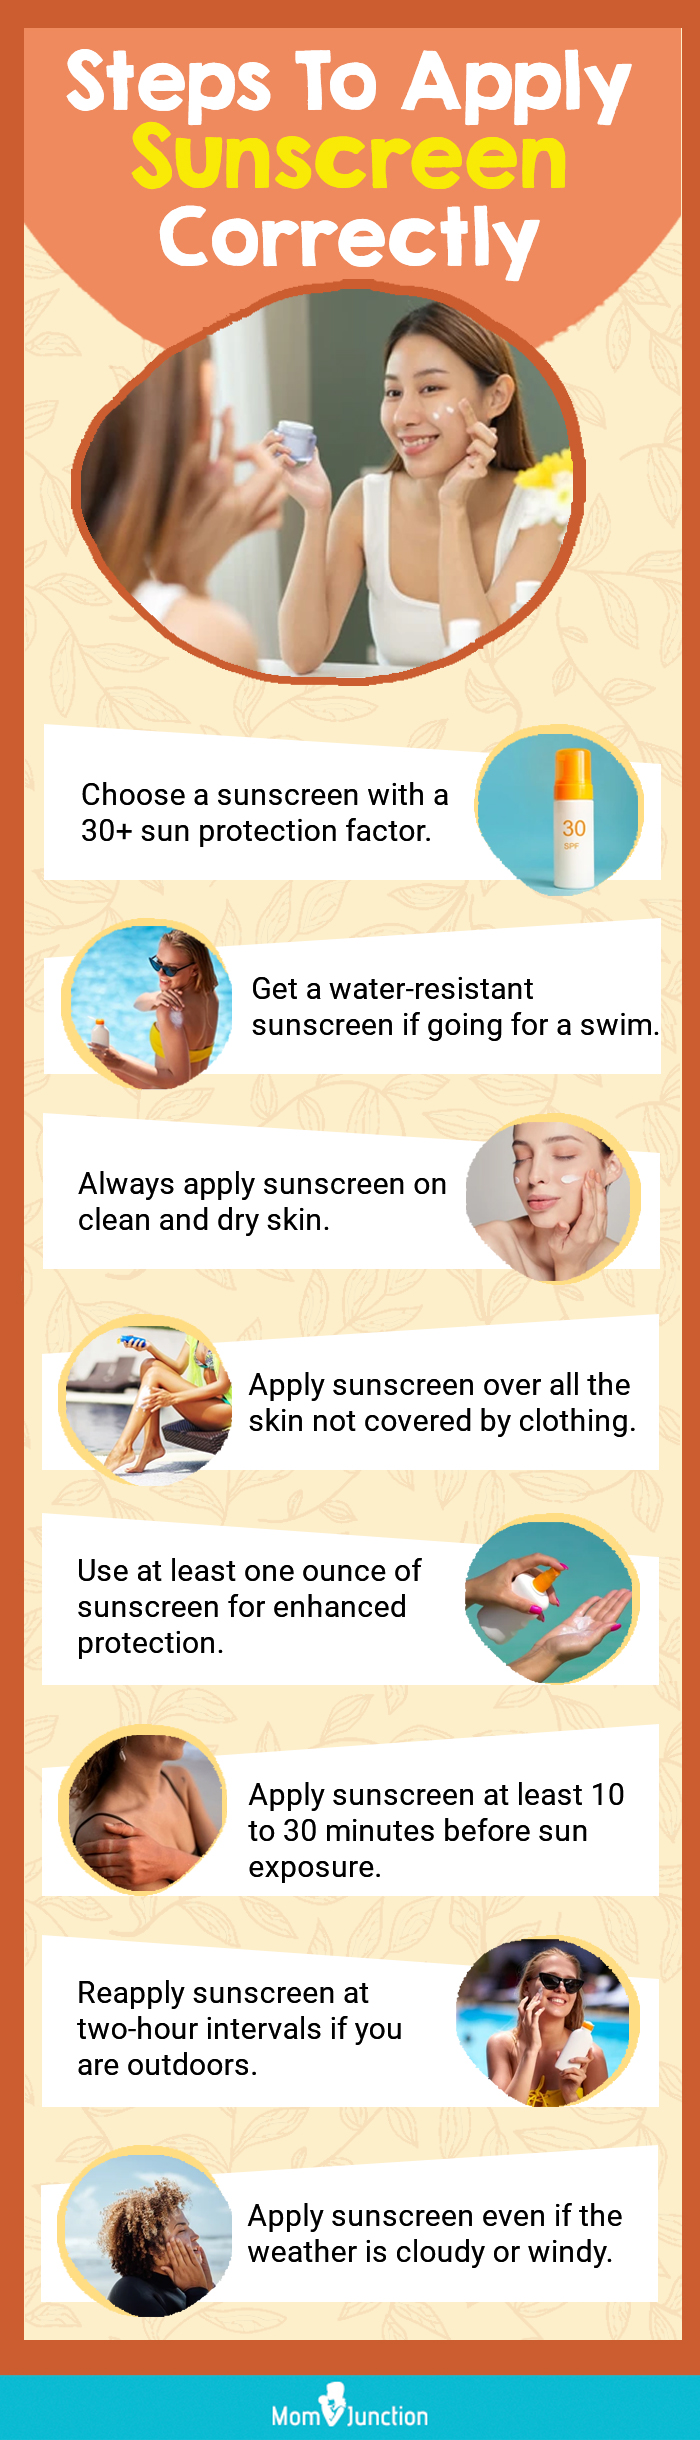 Steps To Apply Sunscreen Correctly (infographic)